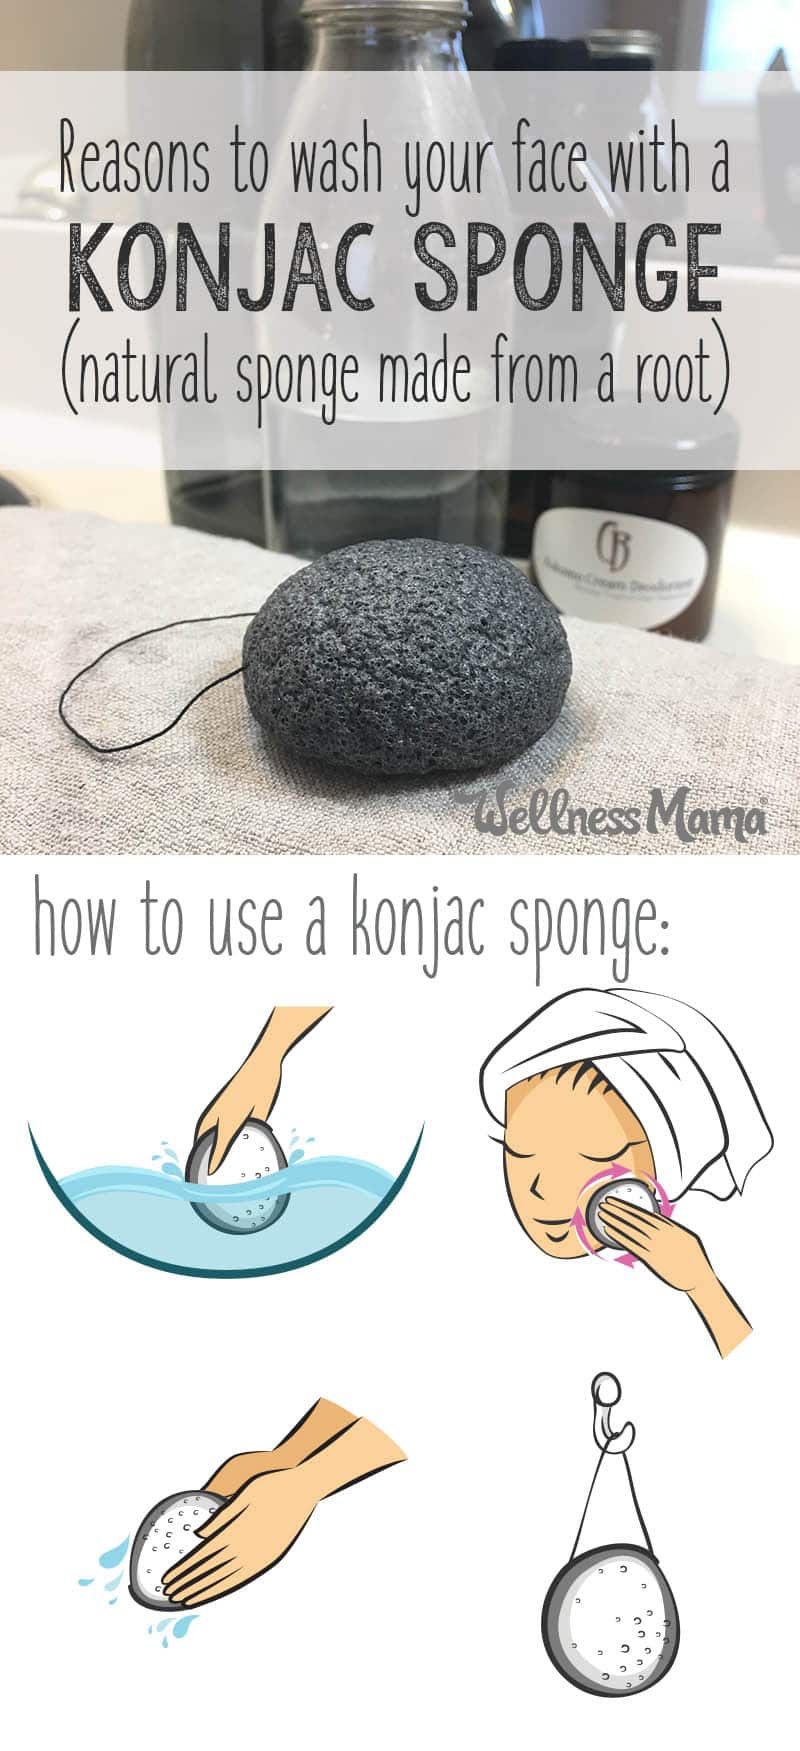 Konjac sponges are a natural way to cleanse, exfoliate, and detoxify facial skin. Switch from a washcloth to a konjac sponge for your best skin ever.